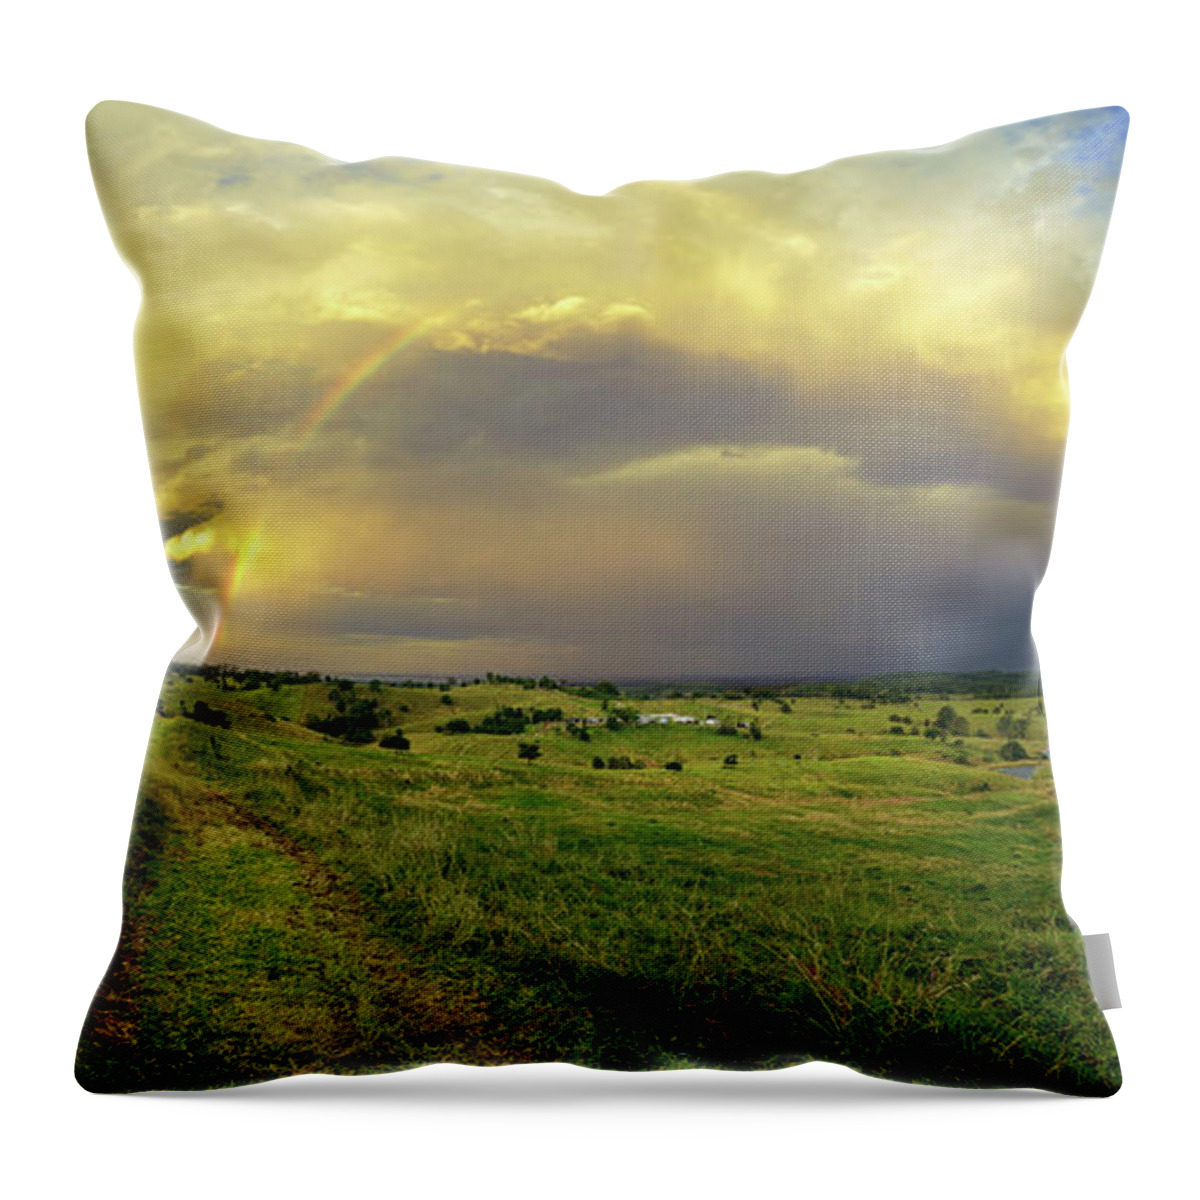 Landscape Throw Pillow featuring the photograph Hinterland by Nicolas Lombard